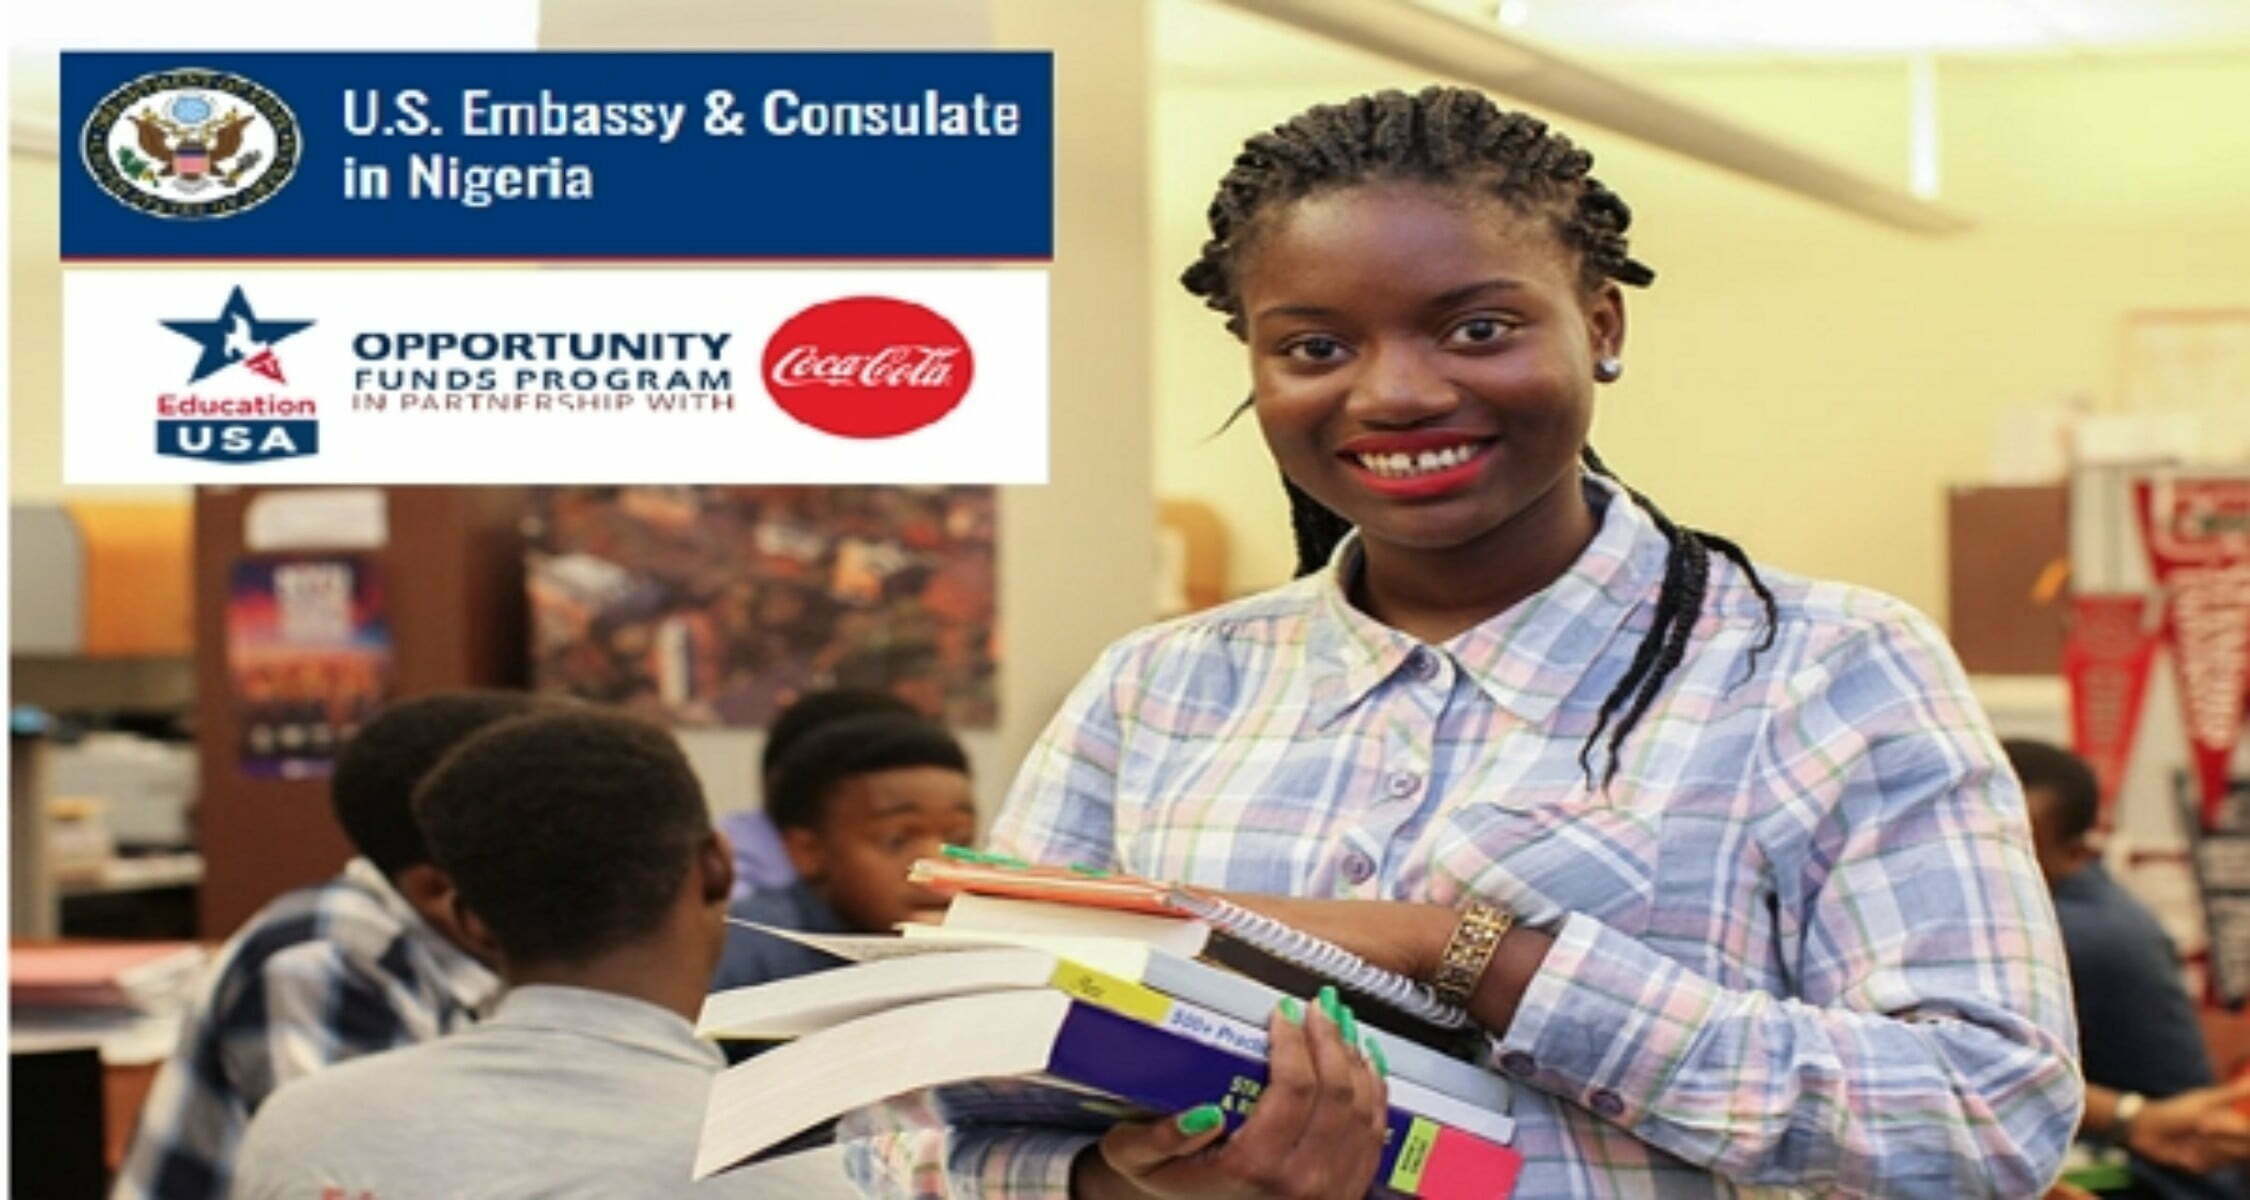 US Embassy EducationUSA Opportunity Funds Program 2022/2023 for Study in USA